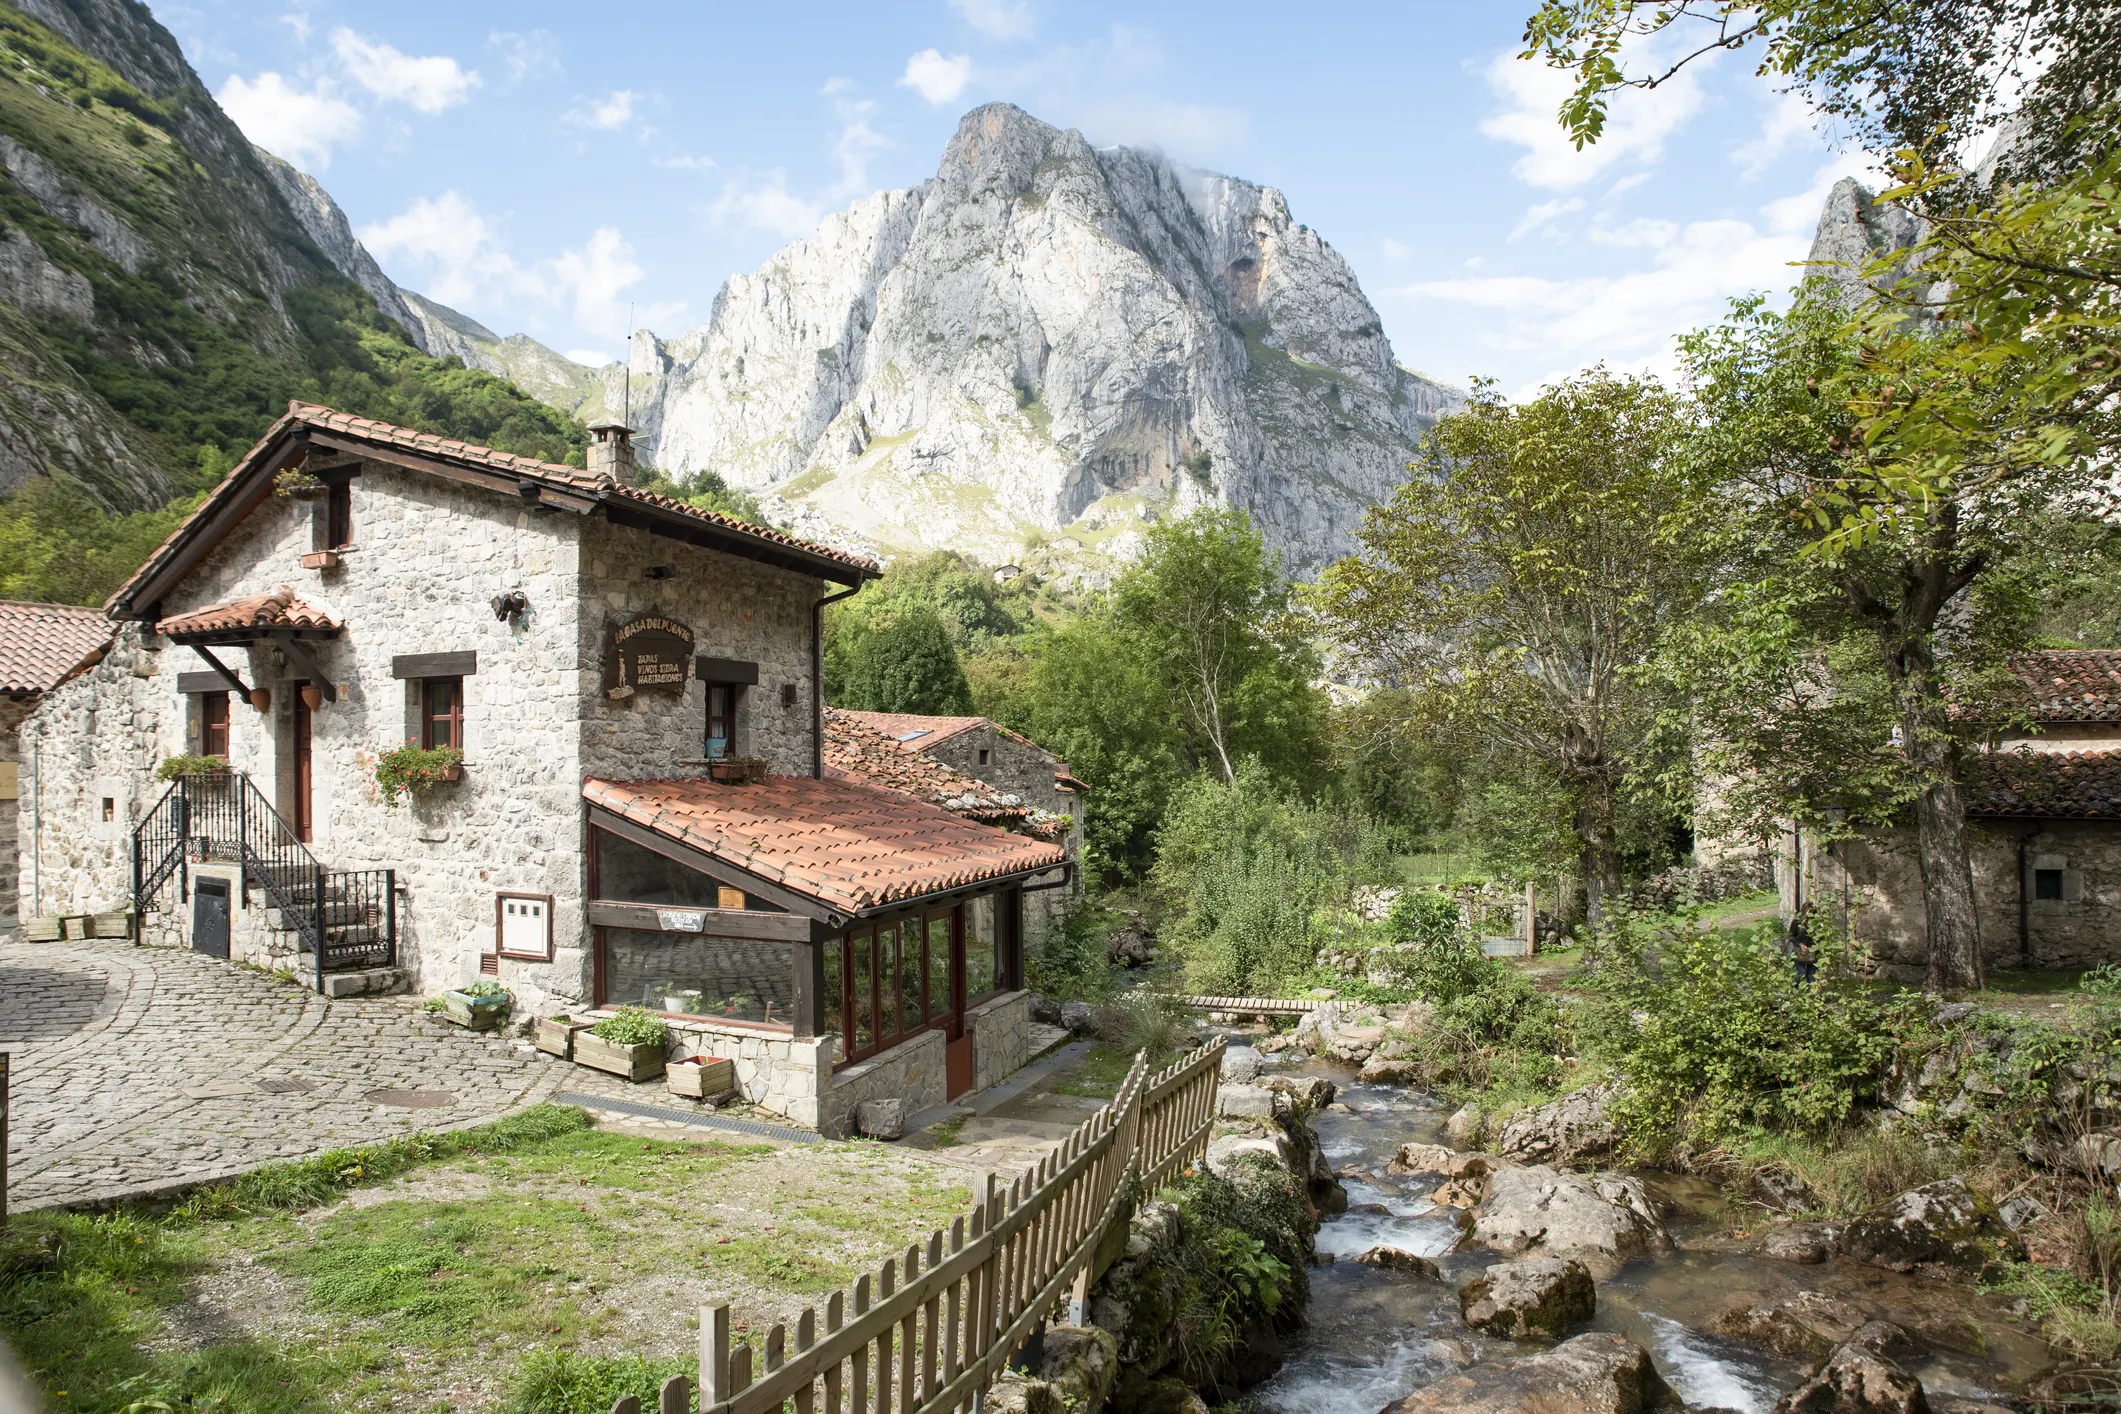 The Swiss Alps…or Spain? Bulnes, population 34, can be reached only by foot or funicular.